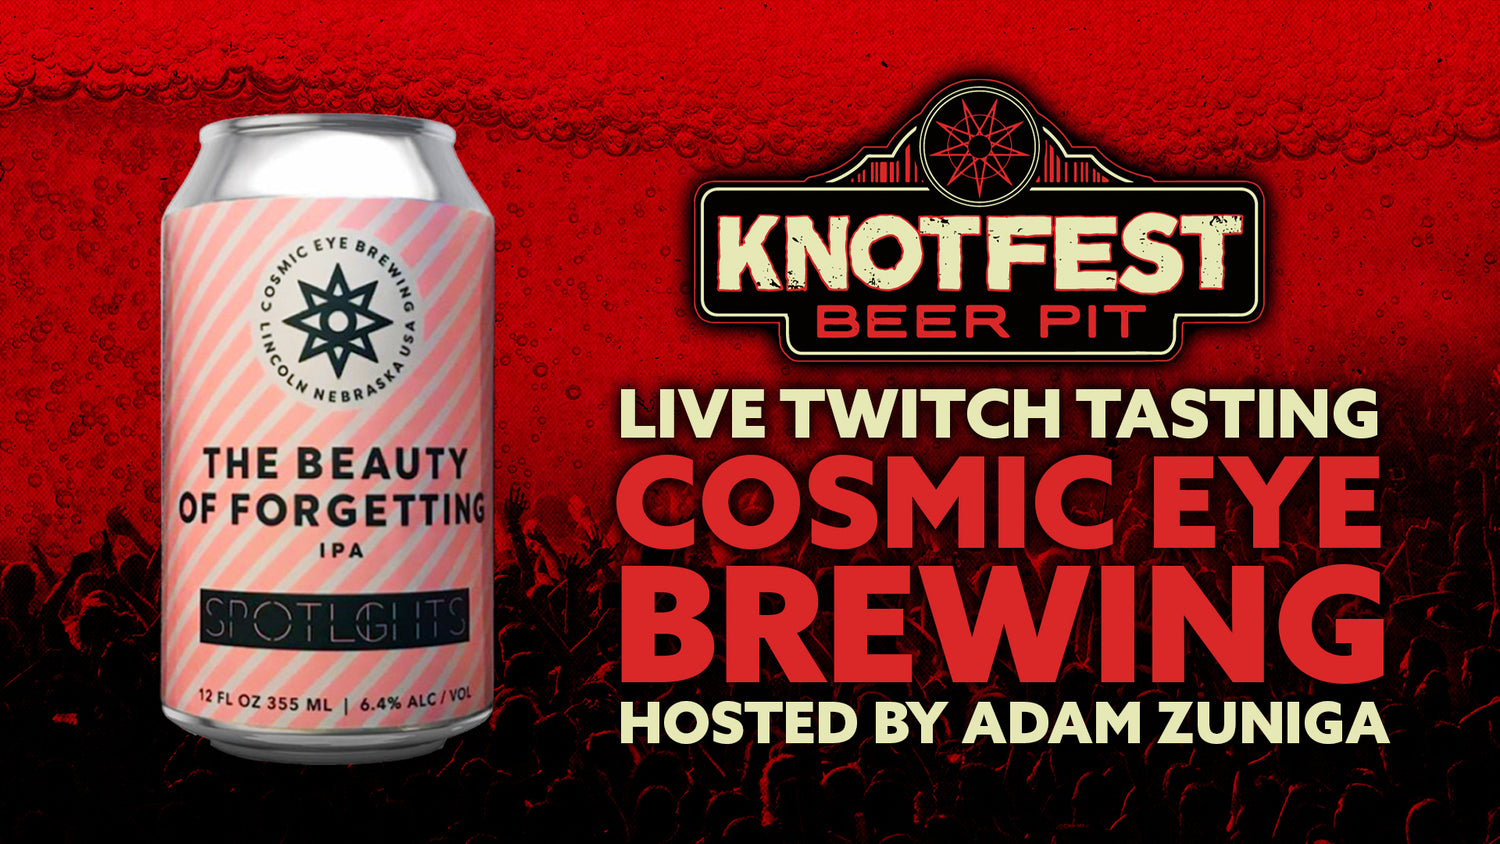 Knotfest Beer Pit Live Tasting Sessions: Spotlights x Cosmic Eye collab 'The Beauty of Forgetting'